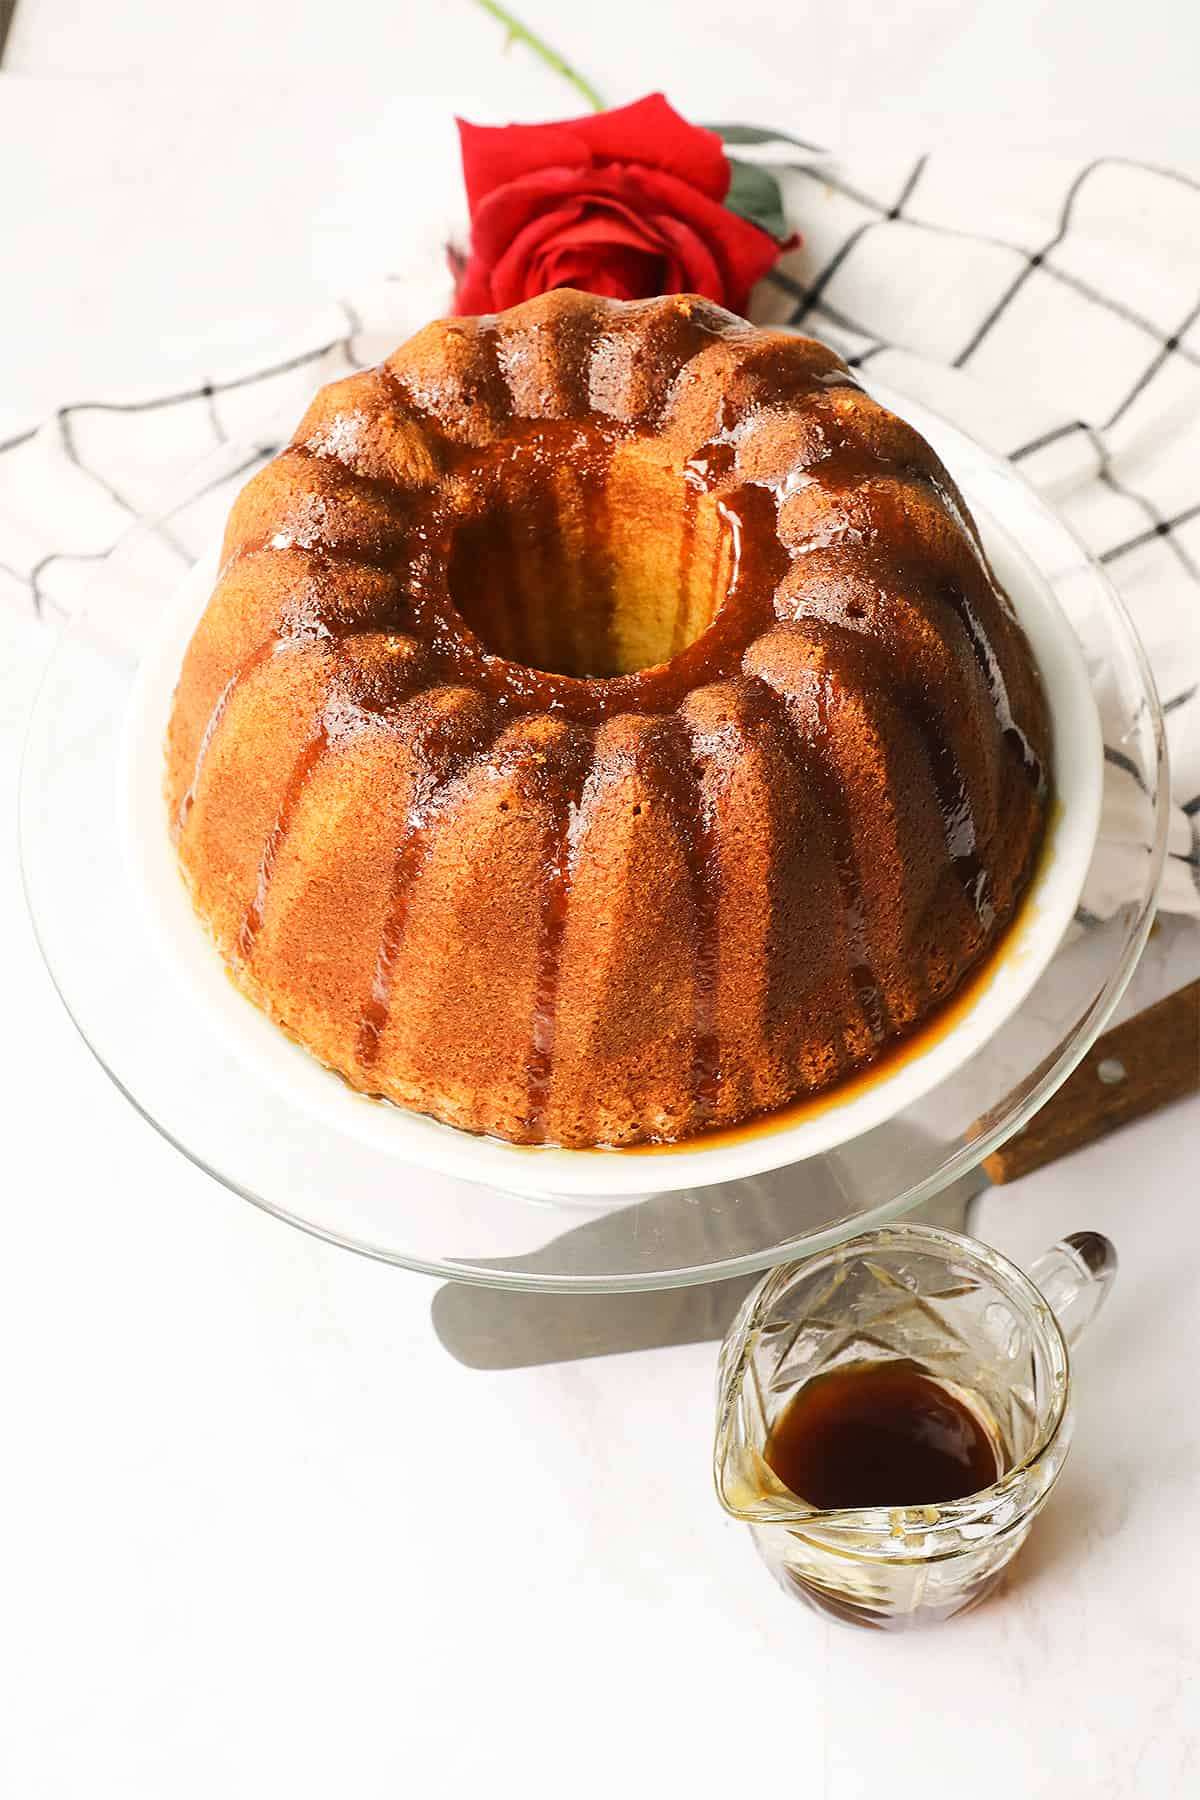 An insanely delicious soaked rum soaked cake ready to enjoy